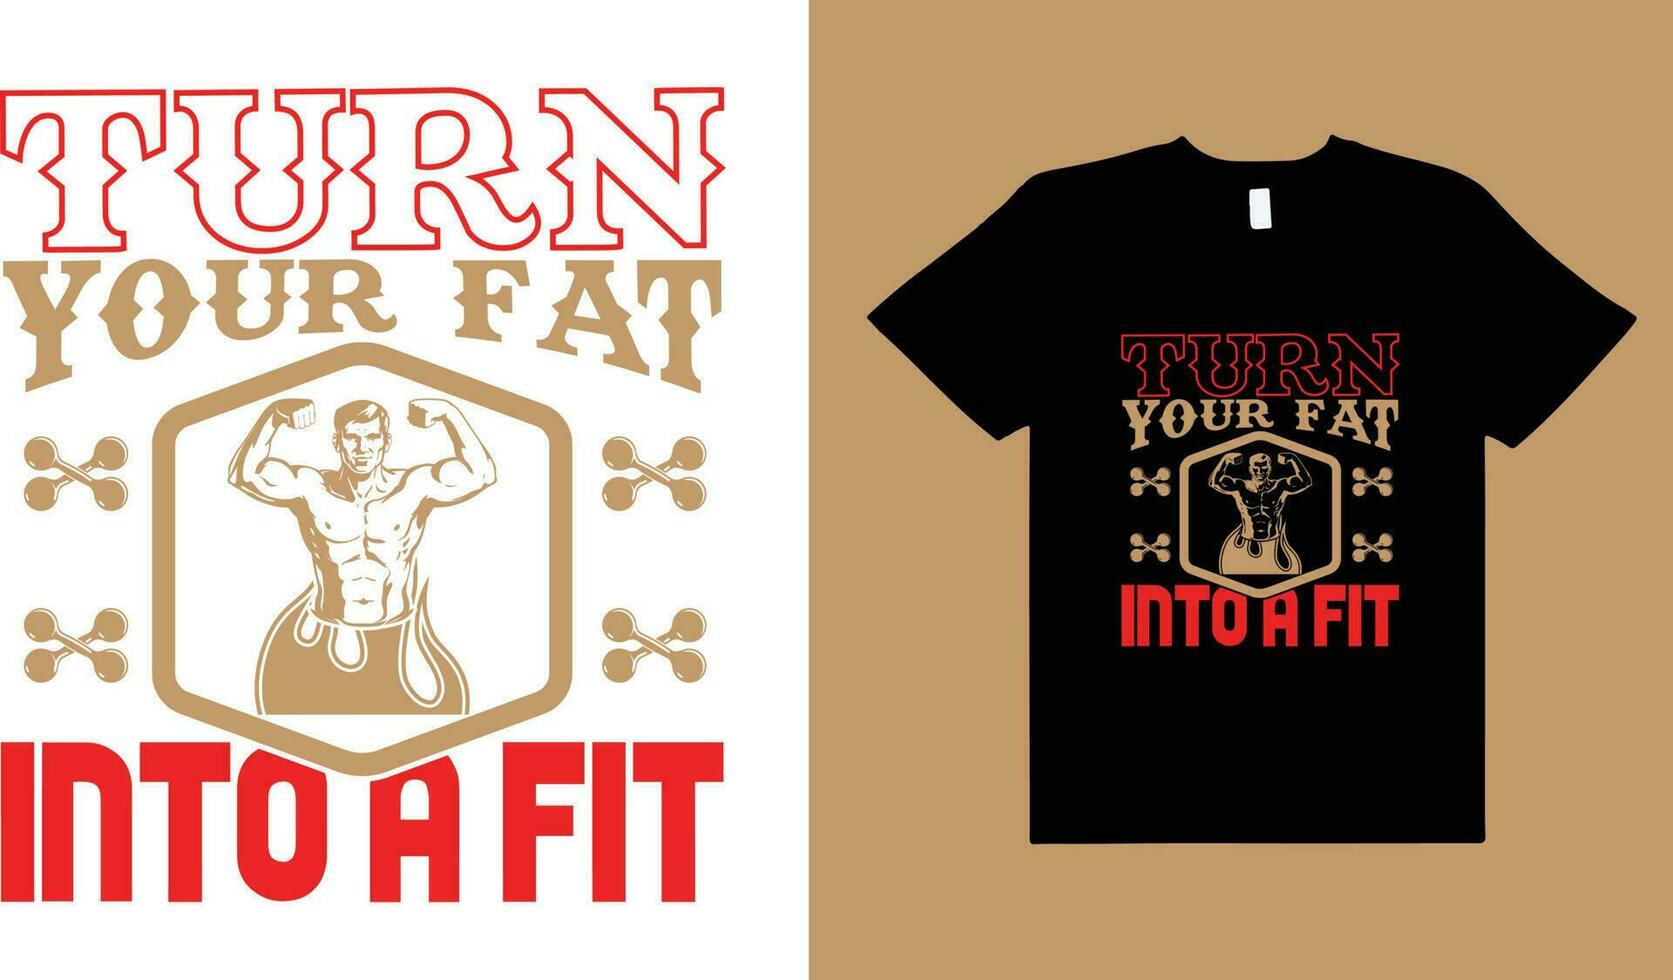 TURN YOUR FAT INTO A FIT, FITNESS T-SHIRT DESIGN. vector